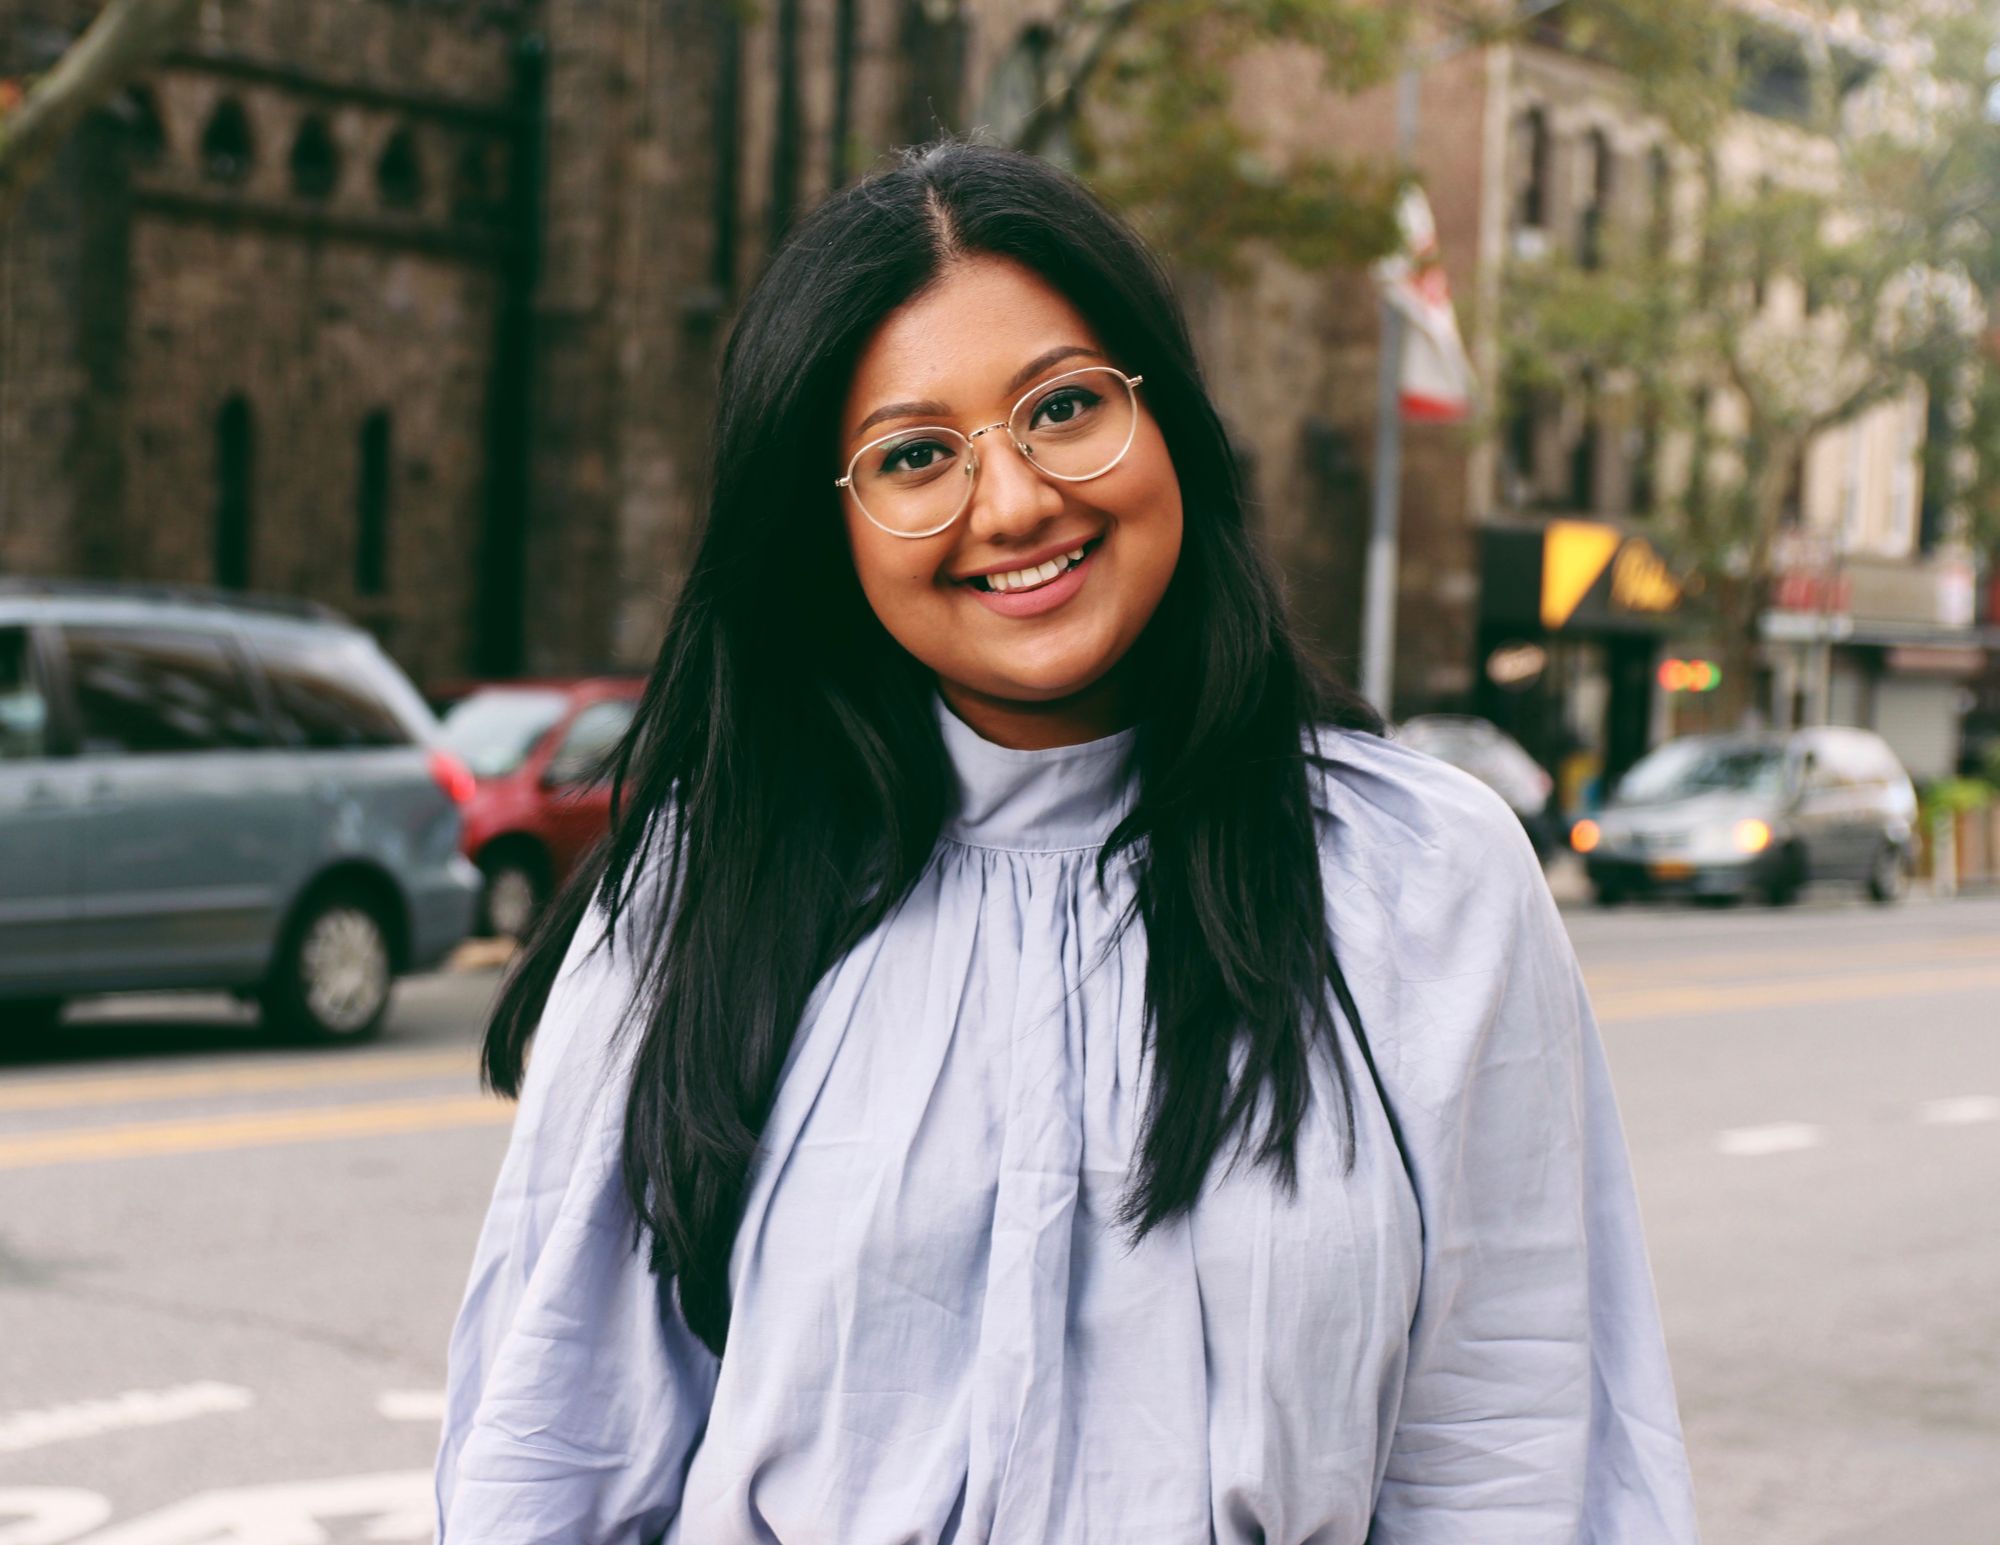 Shahana Hanif Is Running To Represent District 39 In City Council